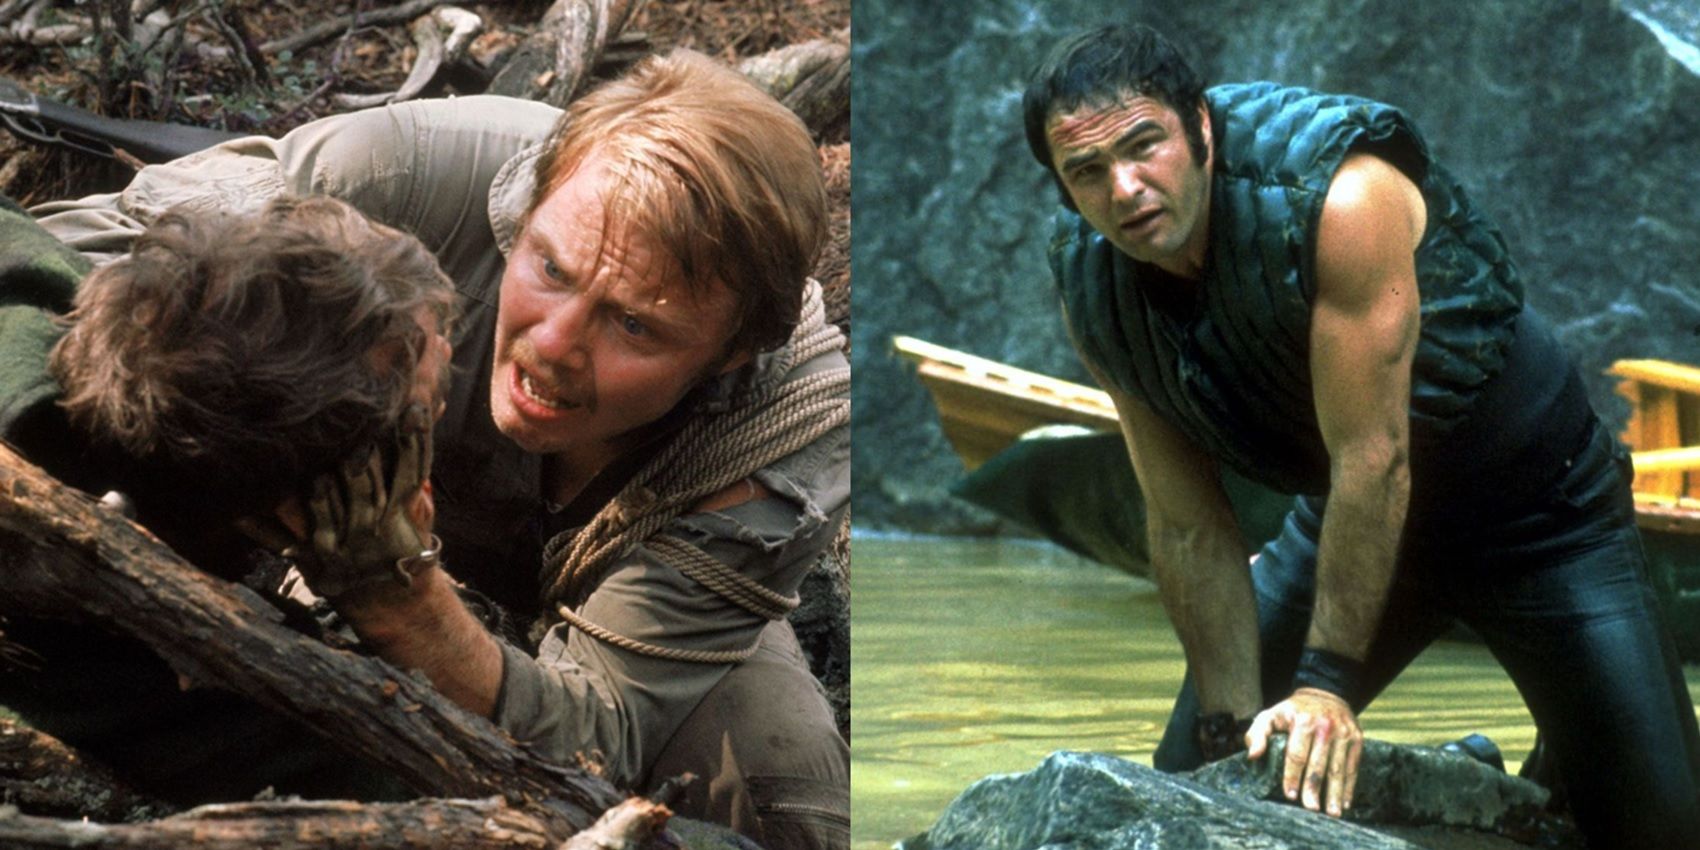 Split image of Jon Voight in the woods and Burt Reynolds on the river in Deliverance